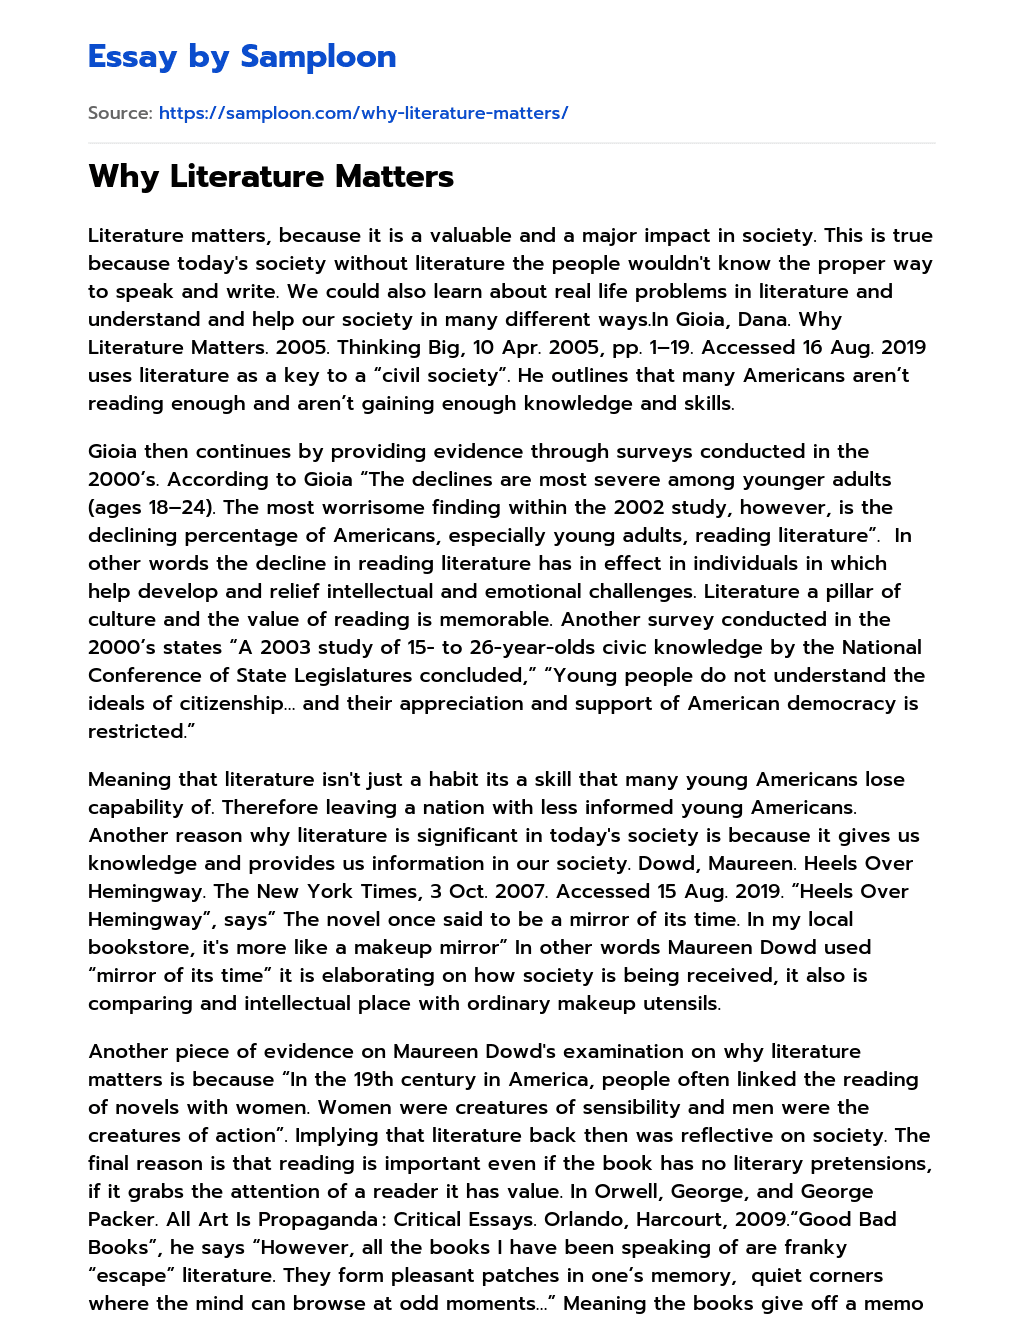 Why Literature Matters essay